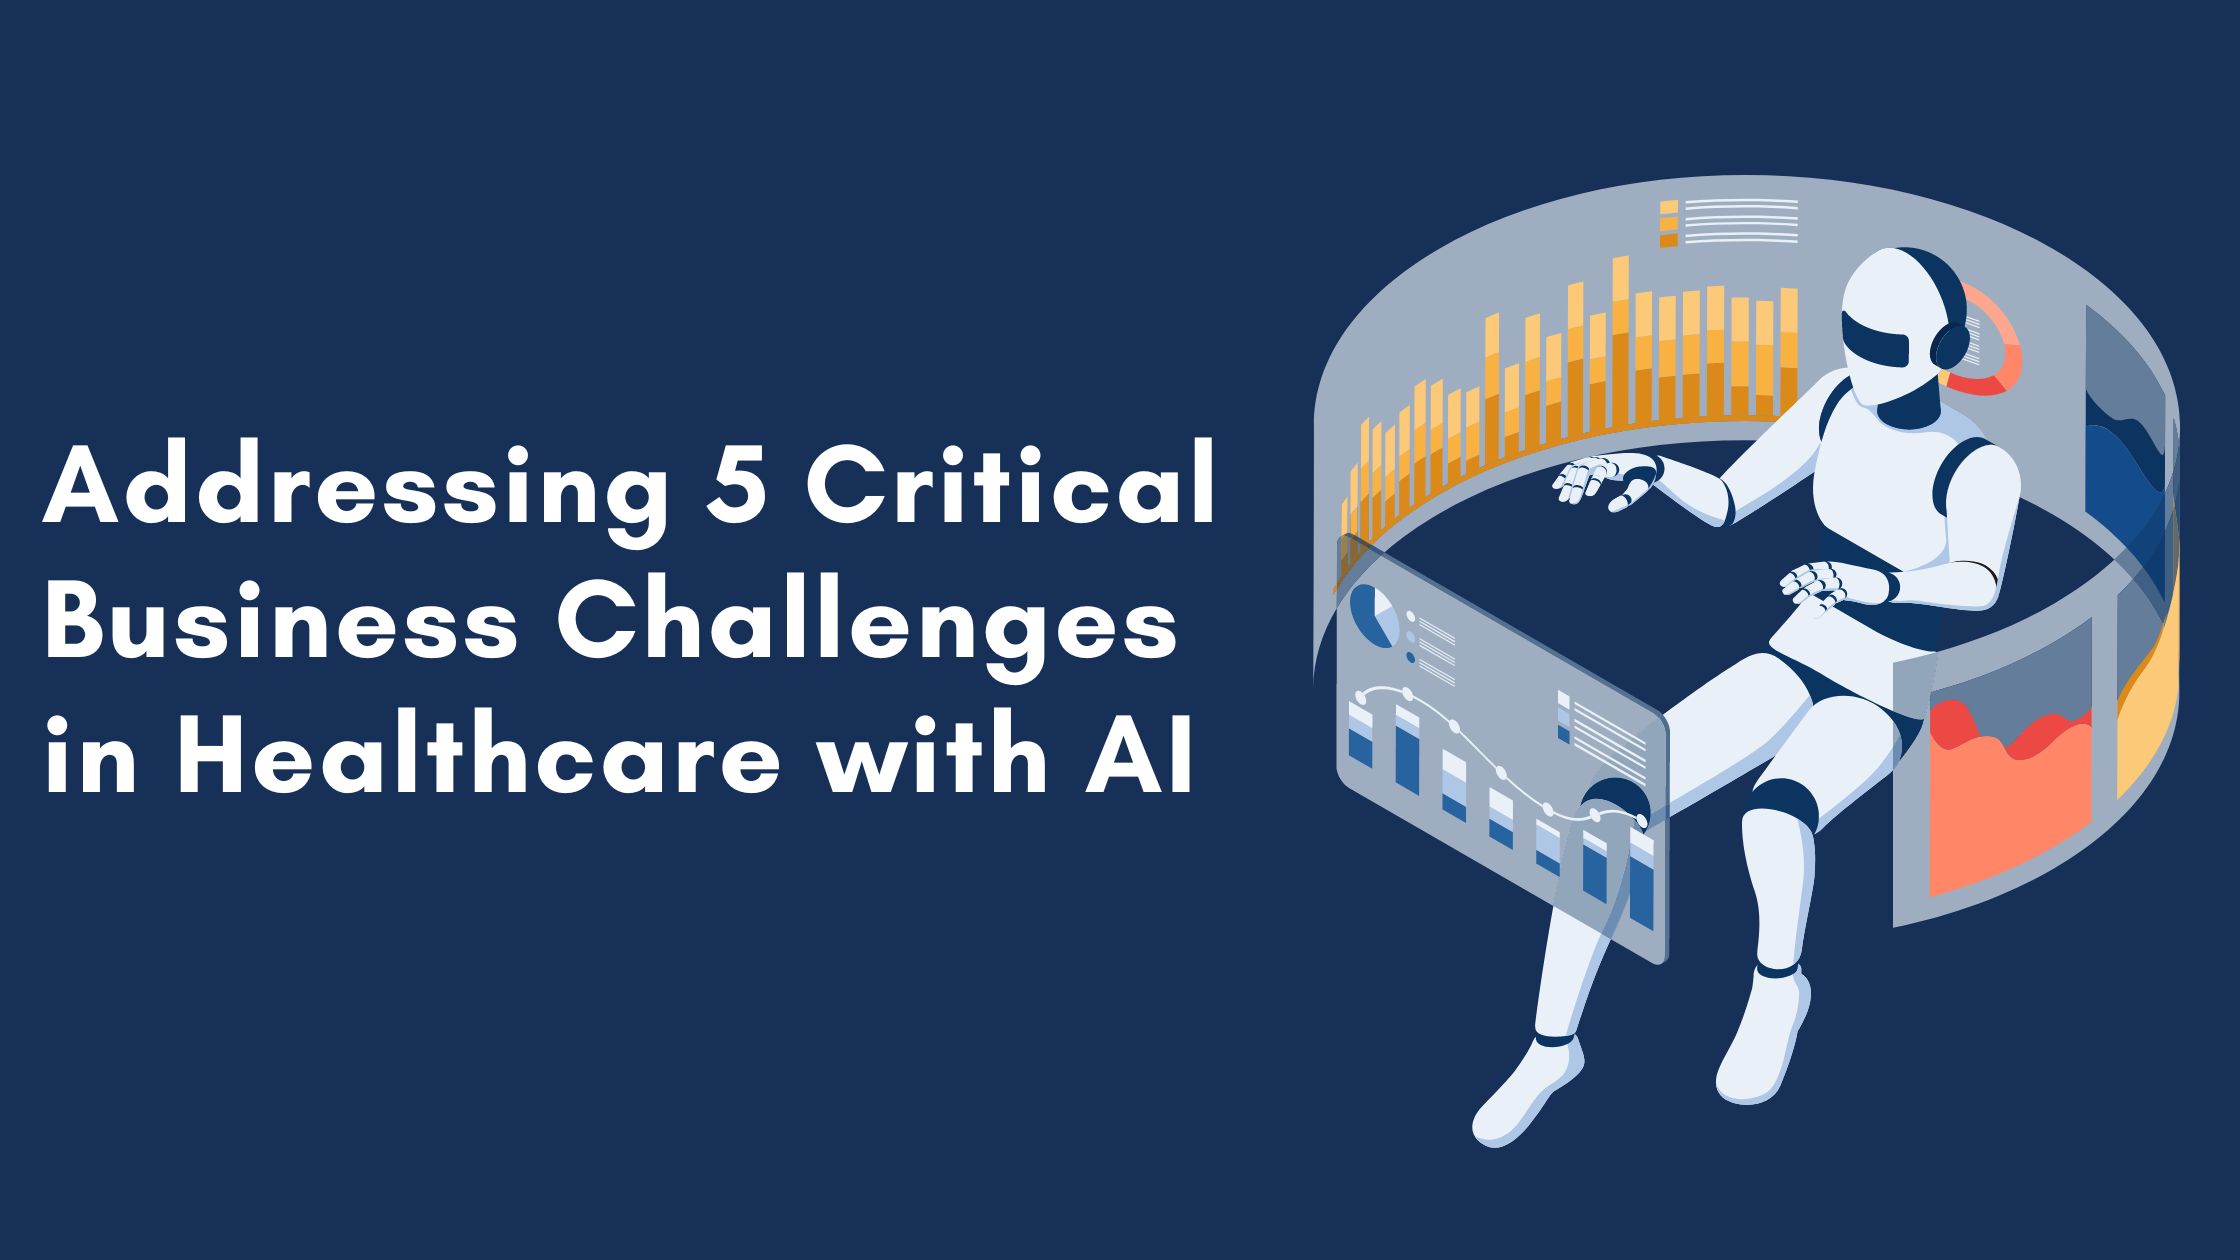 Addressing 5 Critical Business Challenges in Healthcare with AI